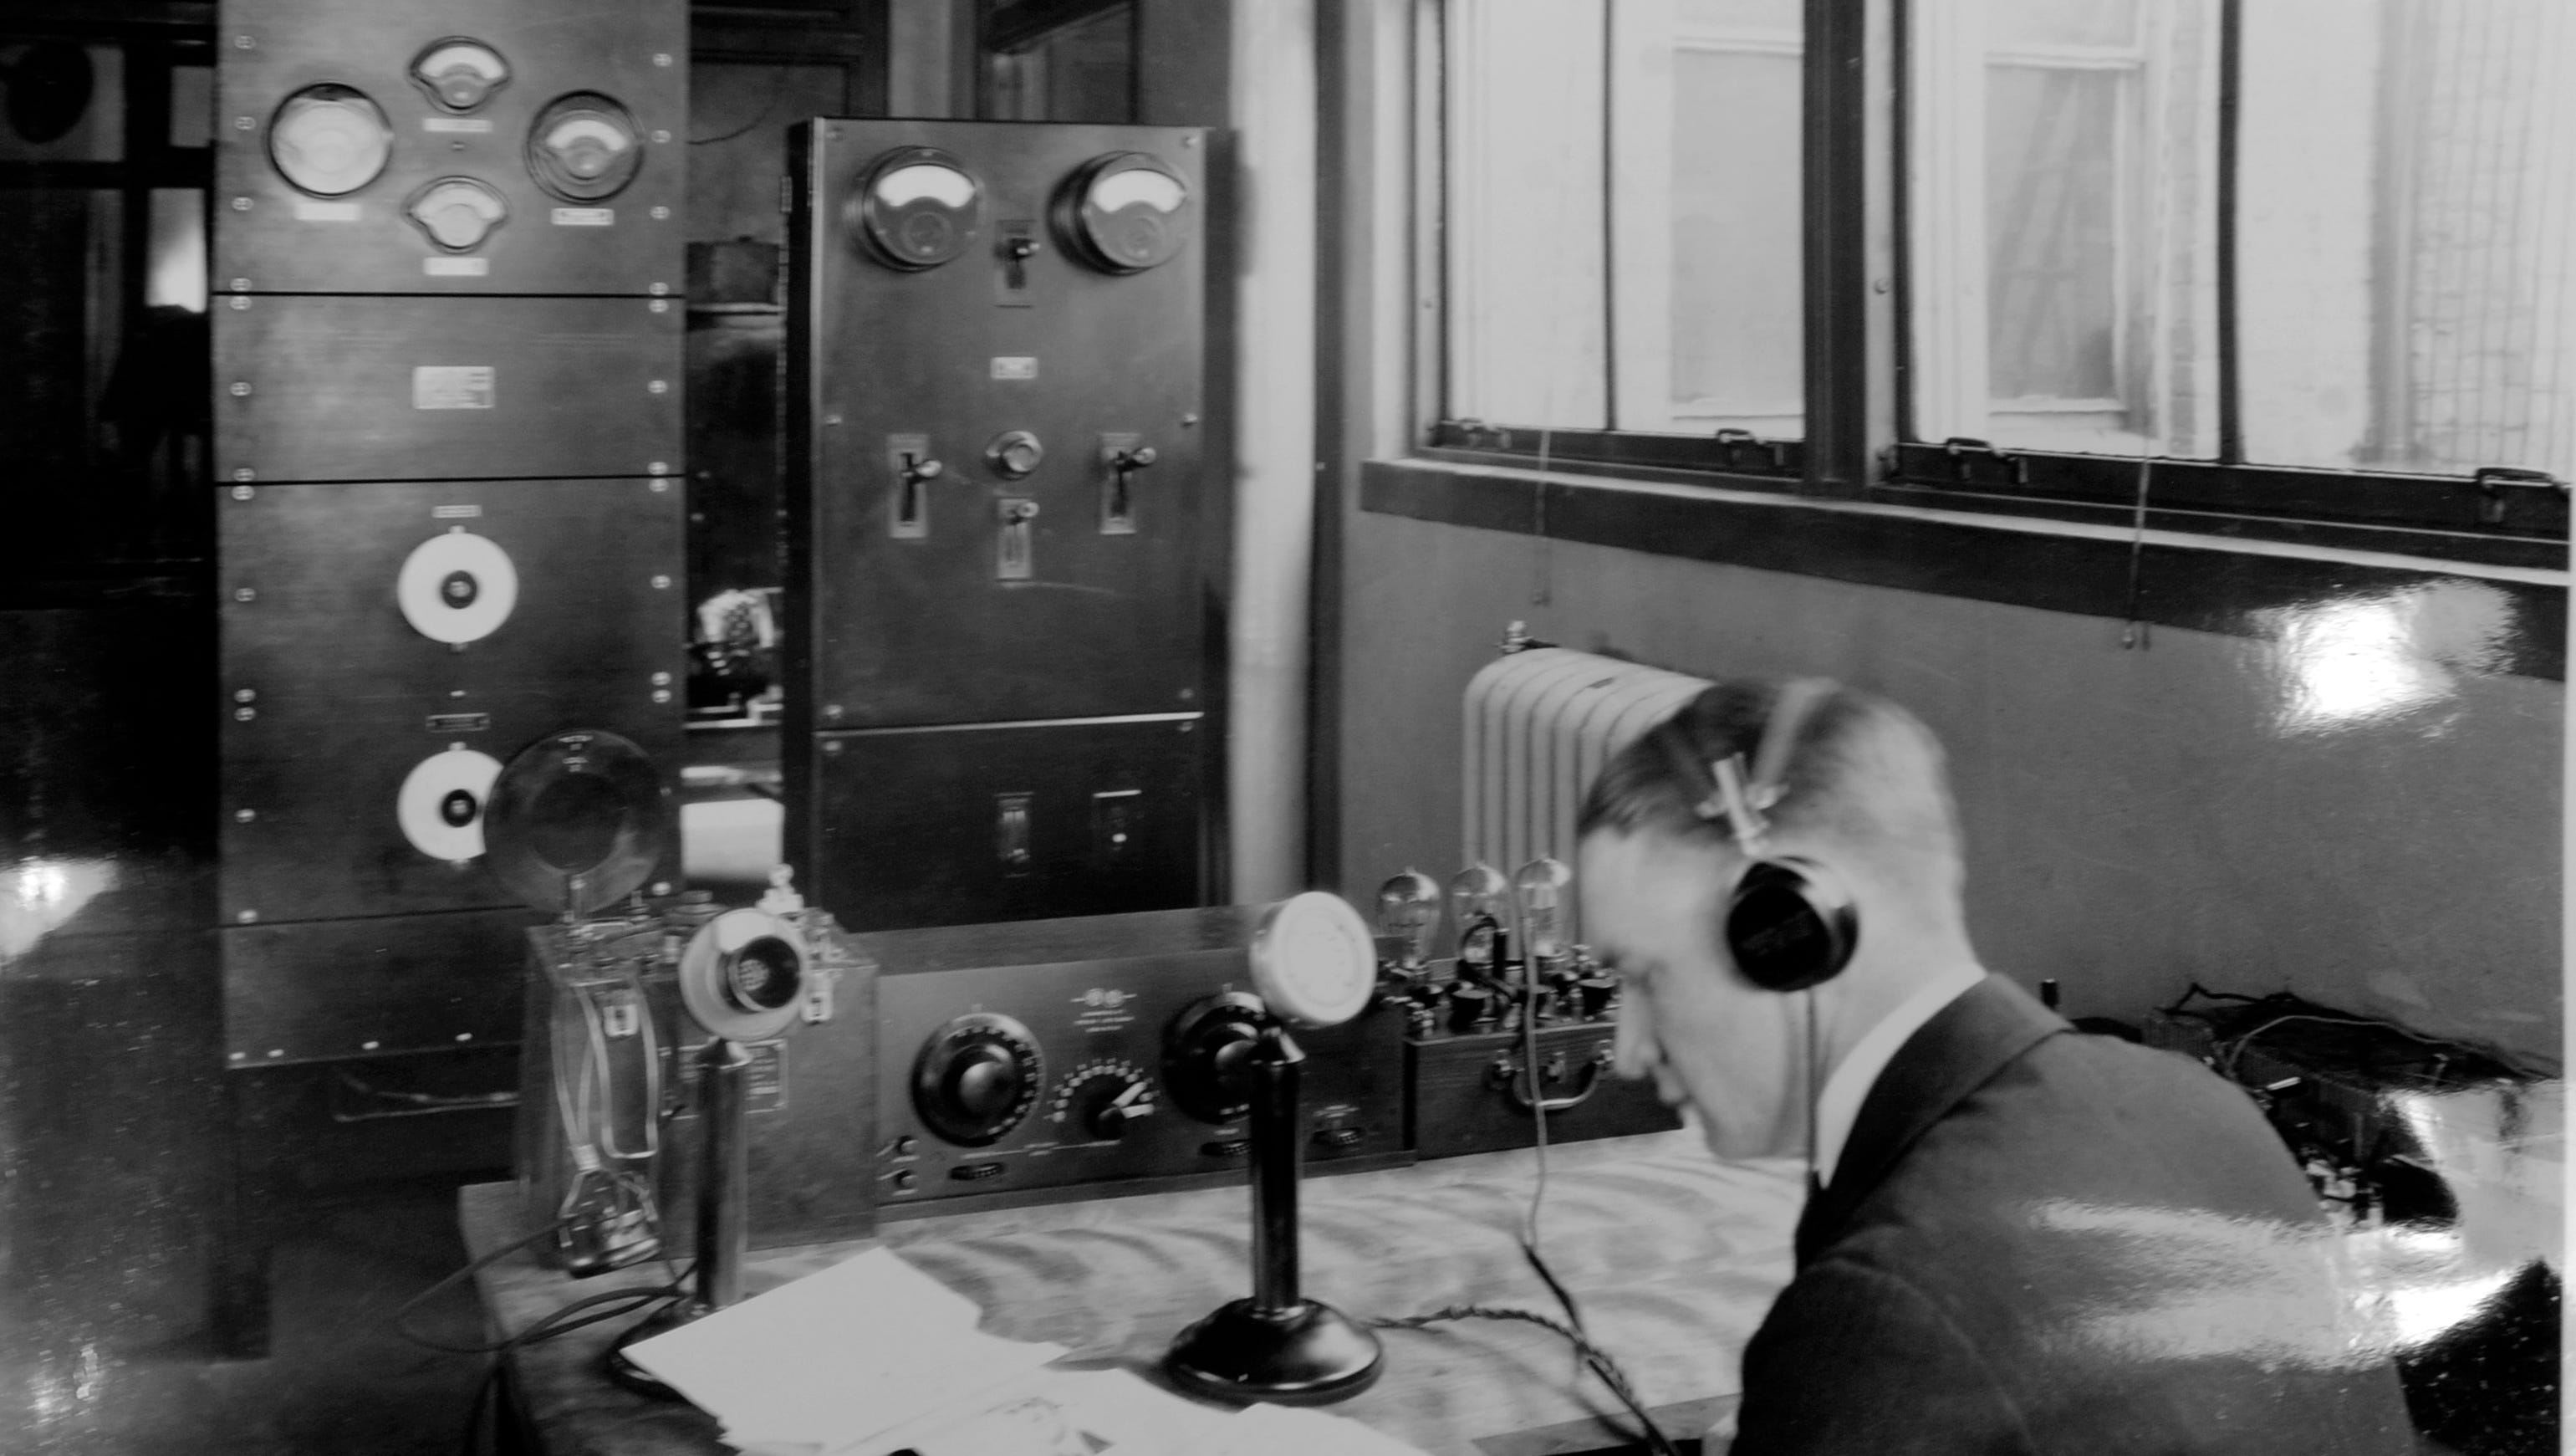 The Detroit News referred to its new station as "The Detroit News Radiophone,"  and first broadcast election results on Sept. 1, 1920.  A year later, the station's first commercial license was issued under new call letters, WBL, and on March 3, 1922 the call letters were changed to WWJ.